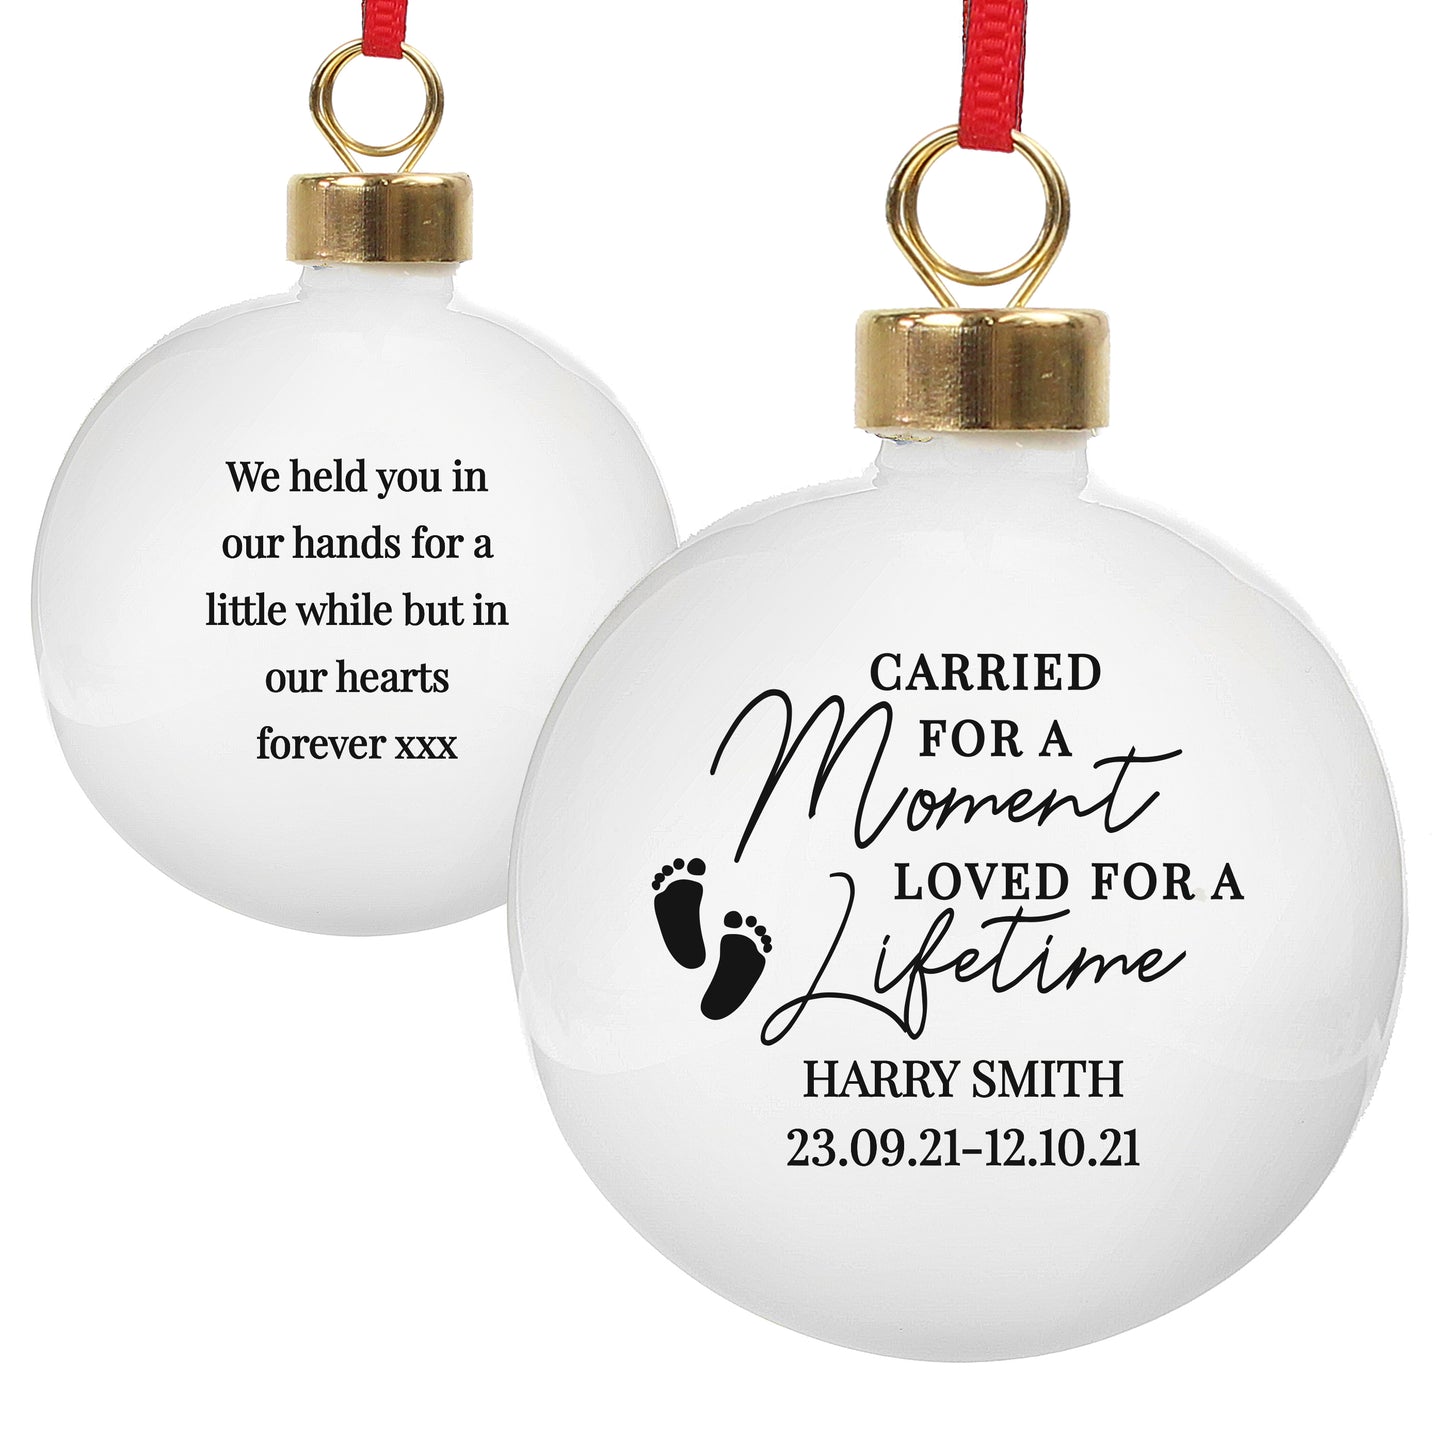 Personalised Carried For A Moment Bauble